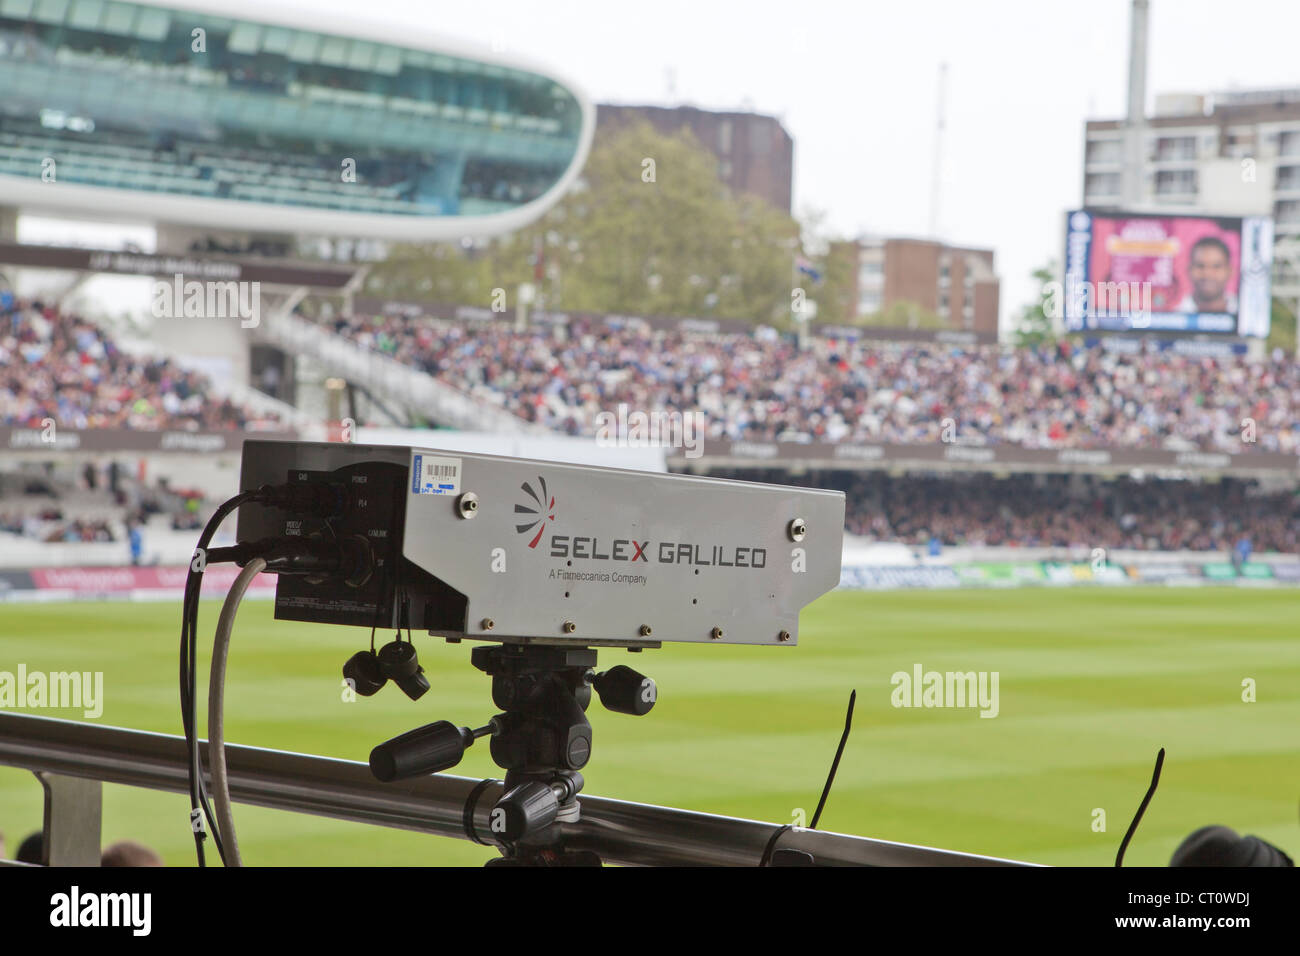 Hot Spot is an infra-red imaging system used in cricket to determine whether the ball has struck the batsman, bat or pad. Stock Photo